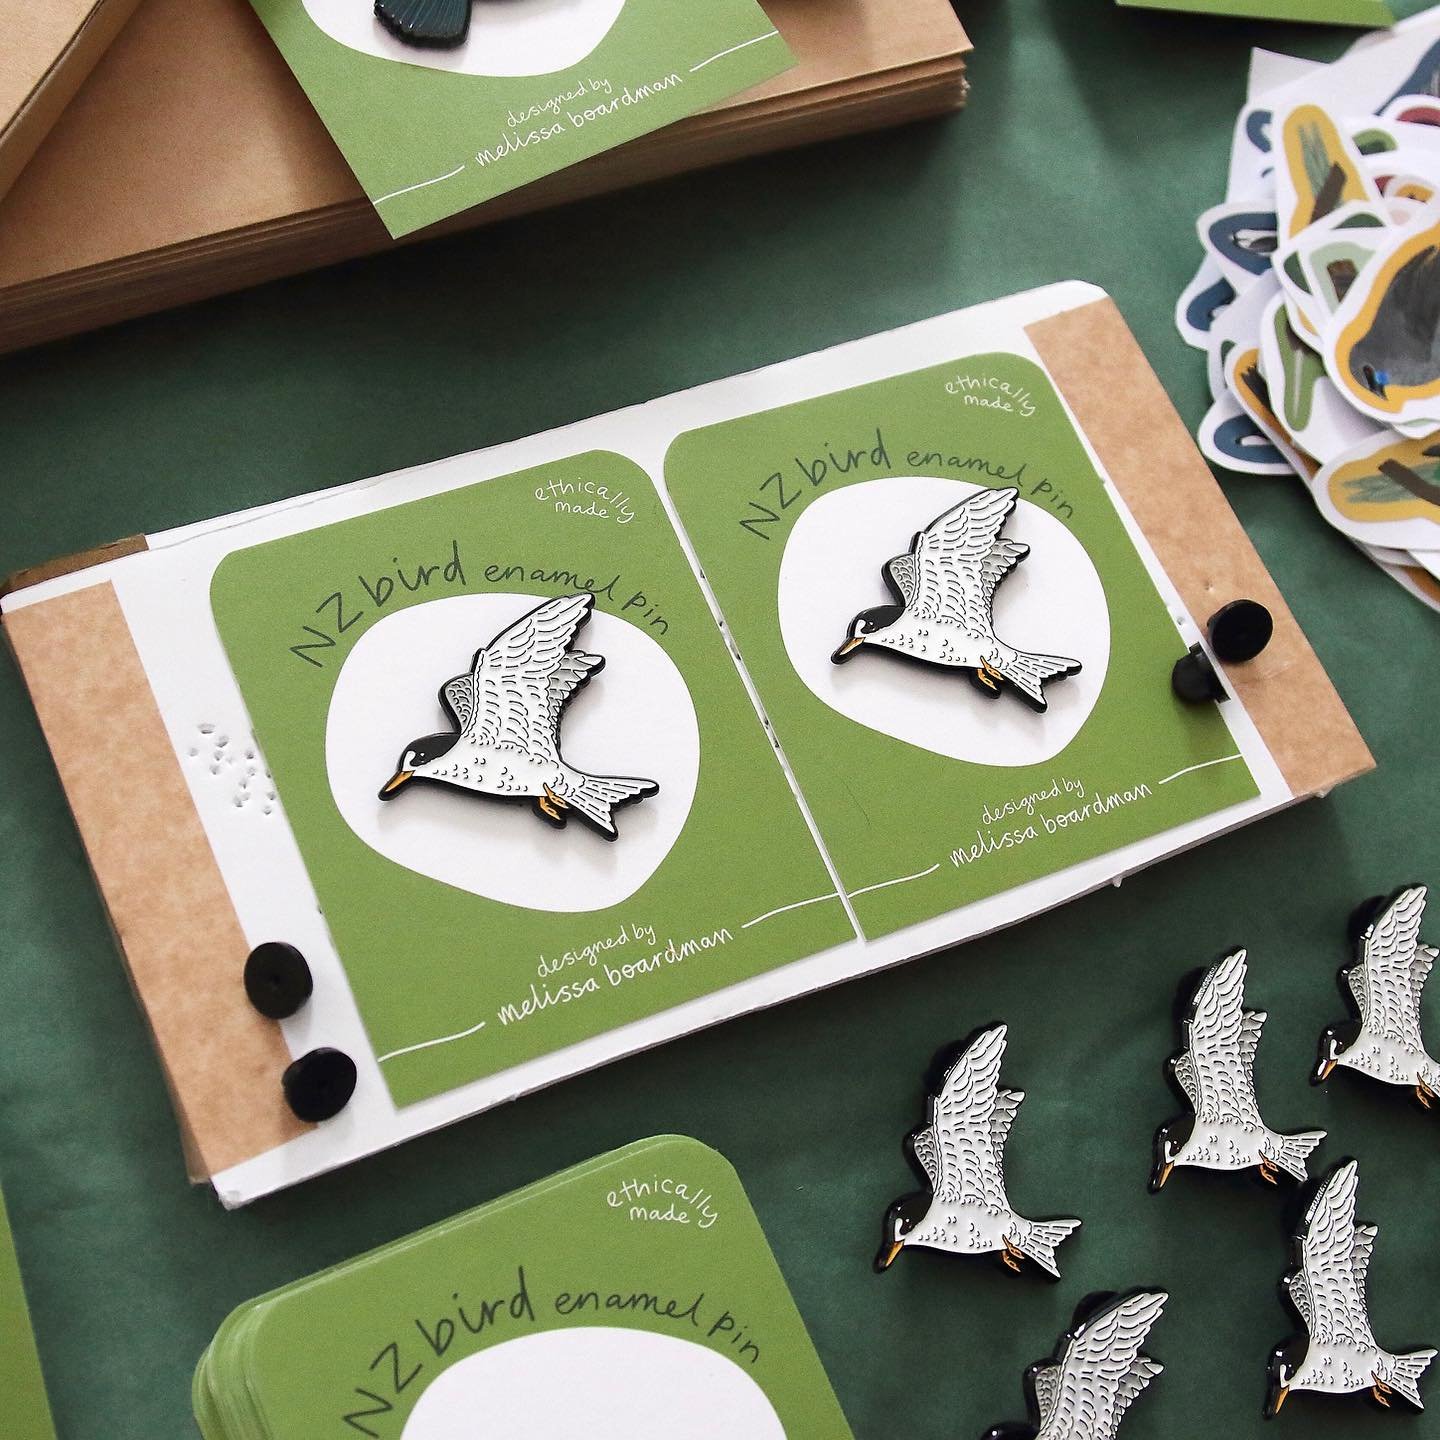 Big thanks if you&rsquo;ve grabbed a tara iti / fairy tern enamel pin this past week!

I&rsquo;ve been busy packing up orders and got most of them sent out today 😊

In case you missed it I&rsquo;m donating $5 from each tara iti pin sold to the NZ Fa